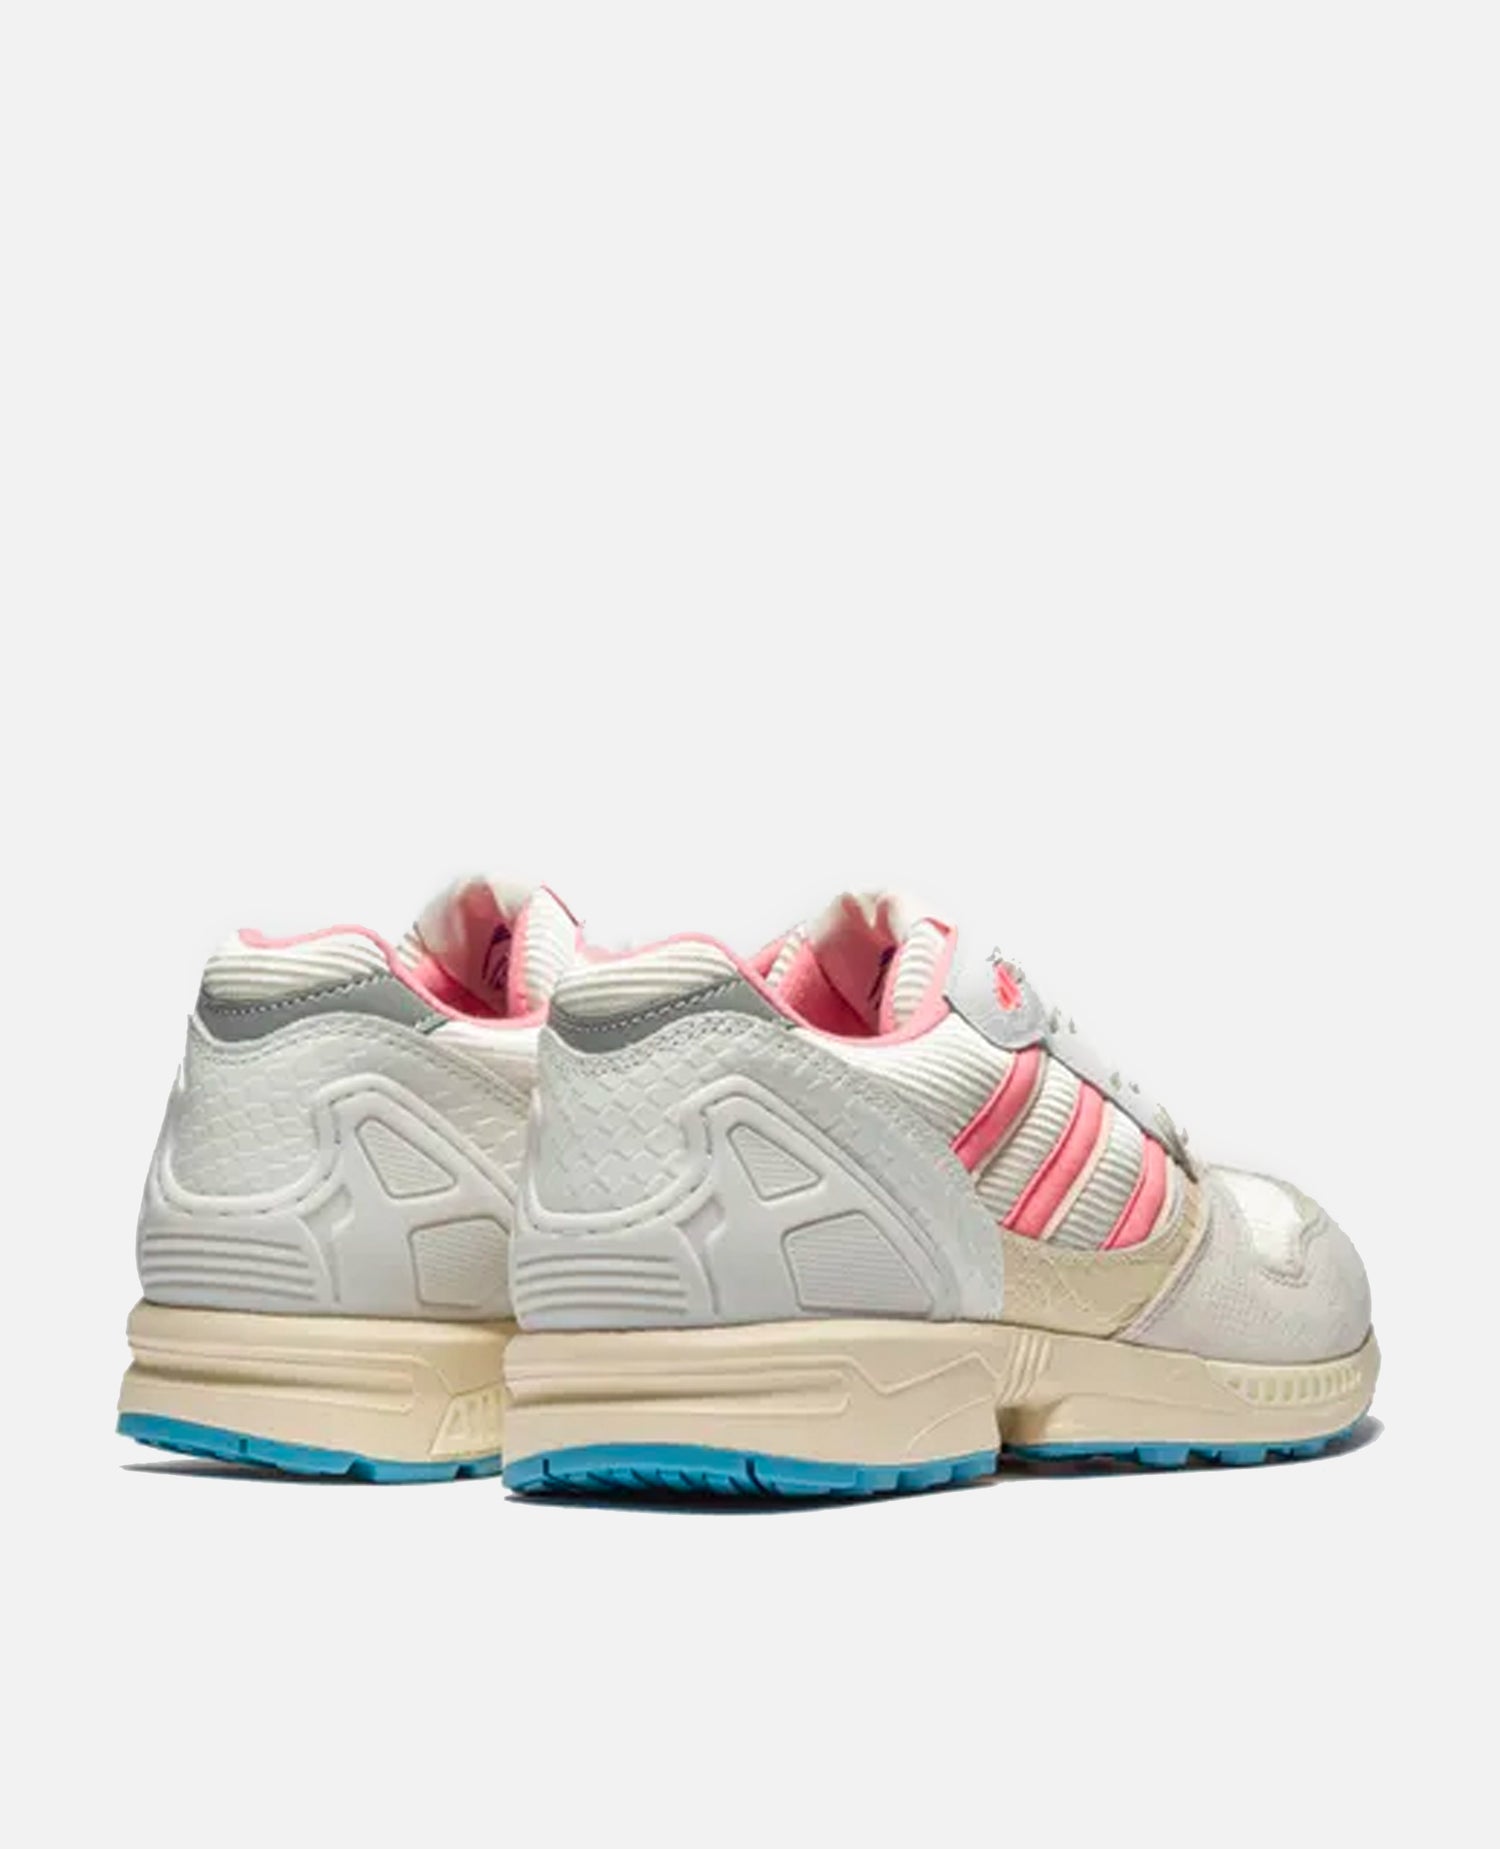 WMNS adidas ZX 5020 (Cloud White/Clear White/Tacste)